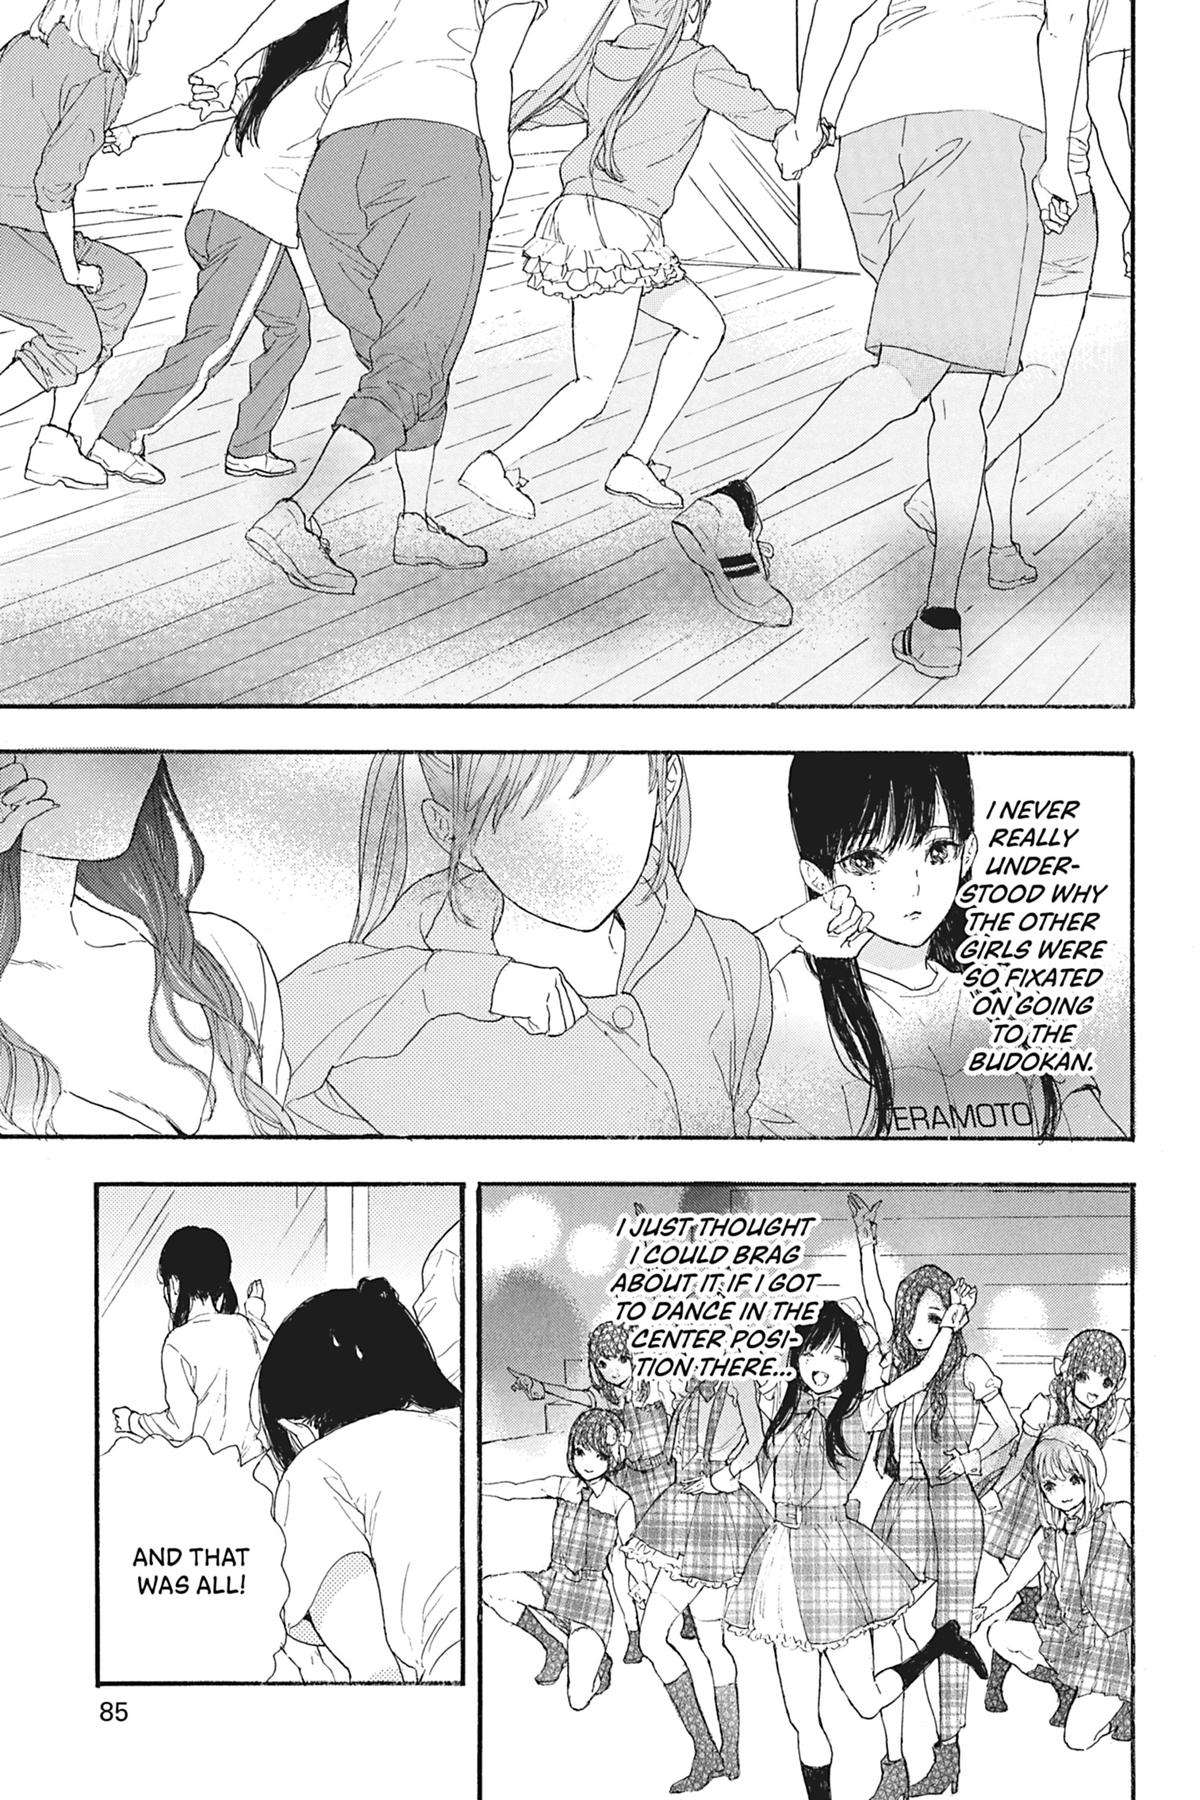 If My Favorite Pop Idol Made It to the Budokan, I Would Die - chapter 22 - #5